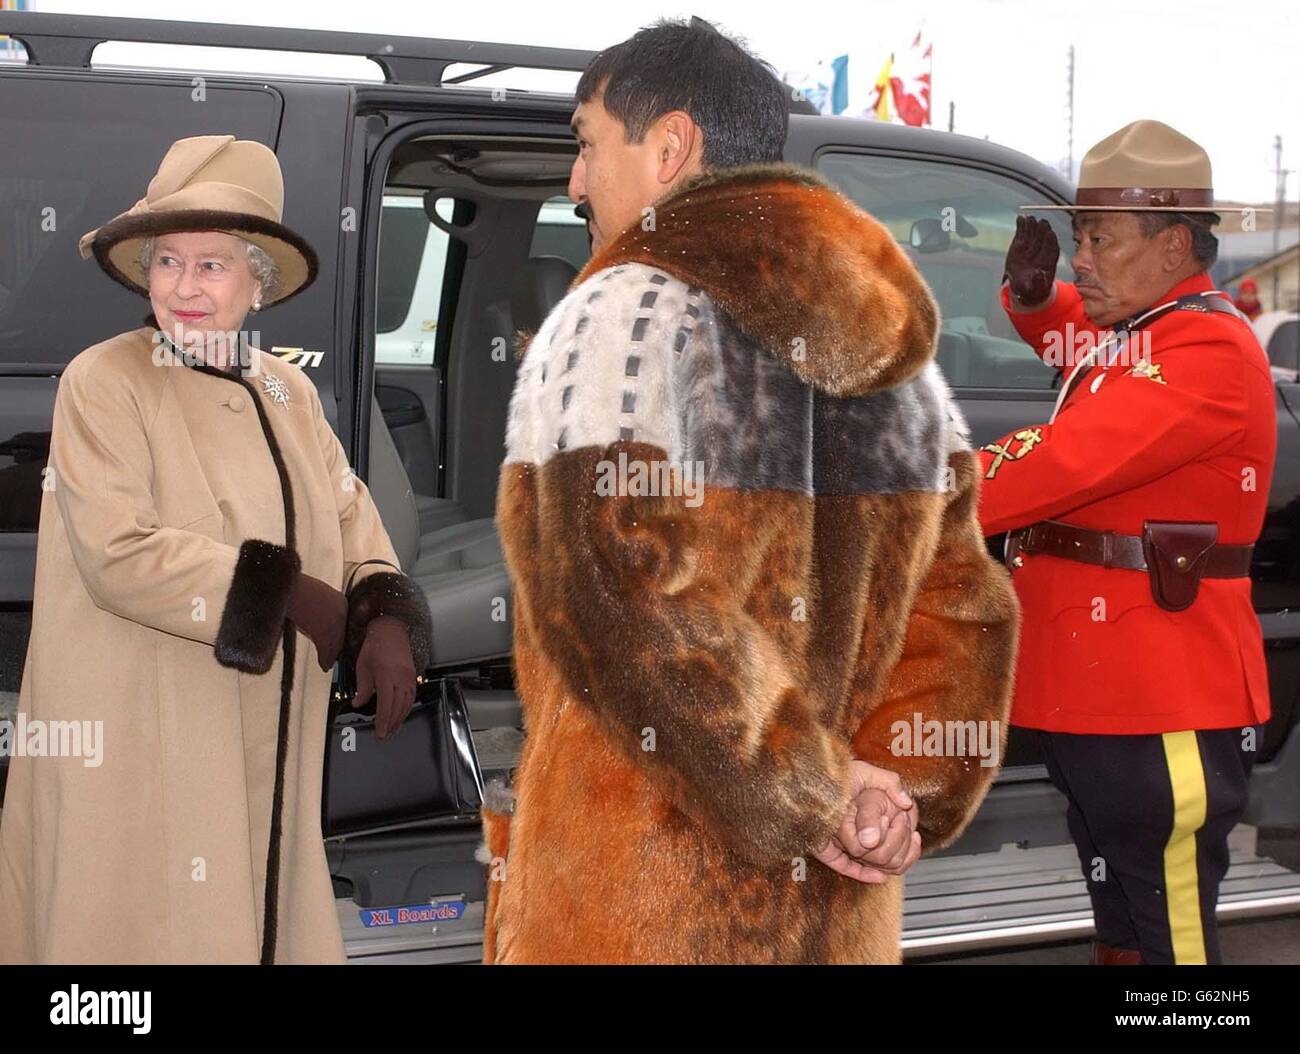 Queen Elizabeth II has the car door held open for her by a Canadian Mountie in Iqaluit, Nunavut in Canada, as she meets Paul Okalik the Government Leader for Nunavut, at the start of a two week Royal visit. Stock Photo